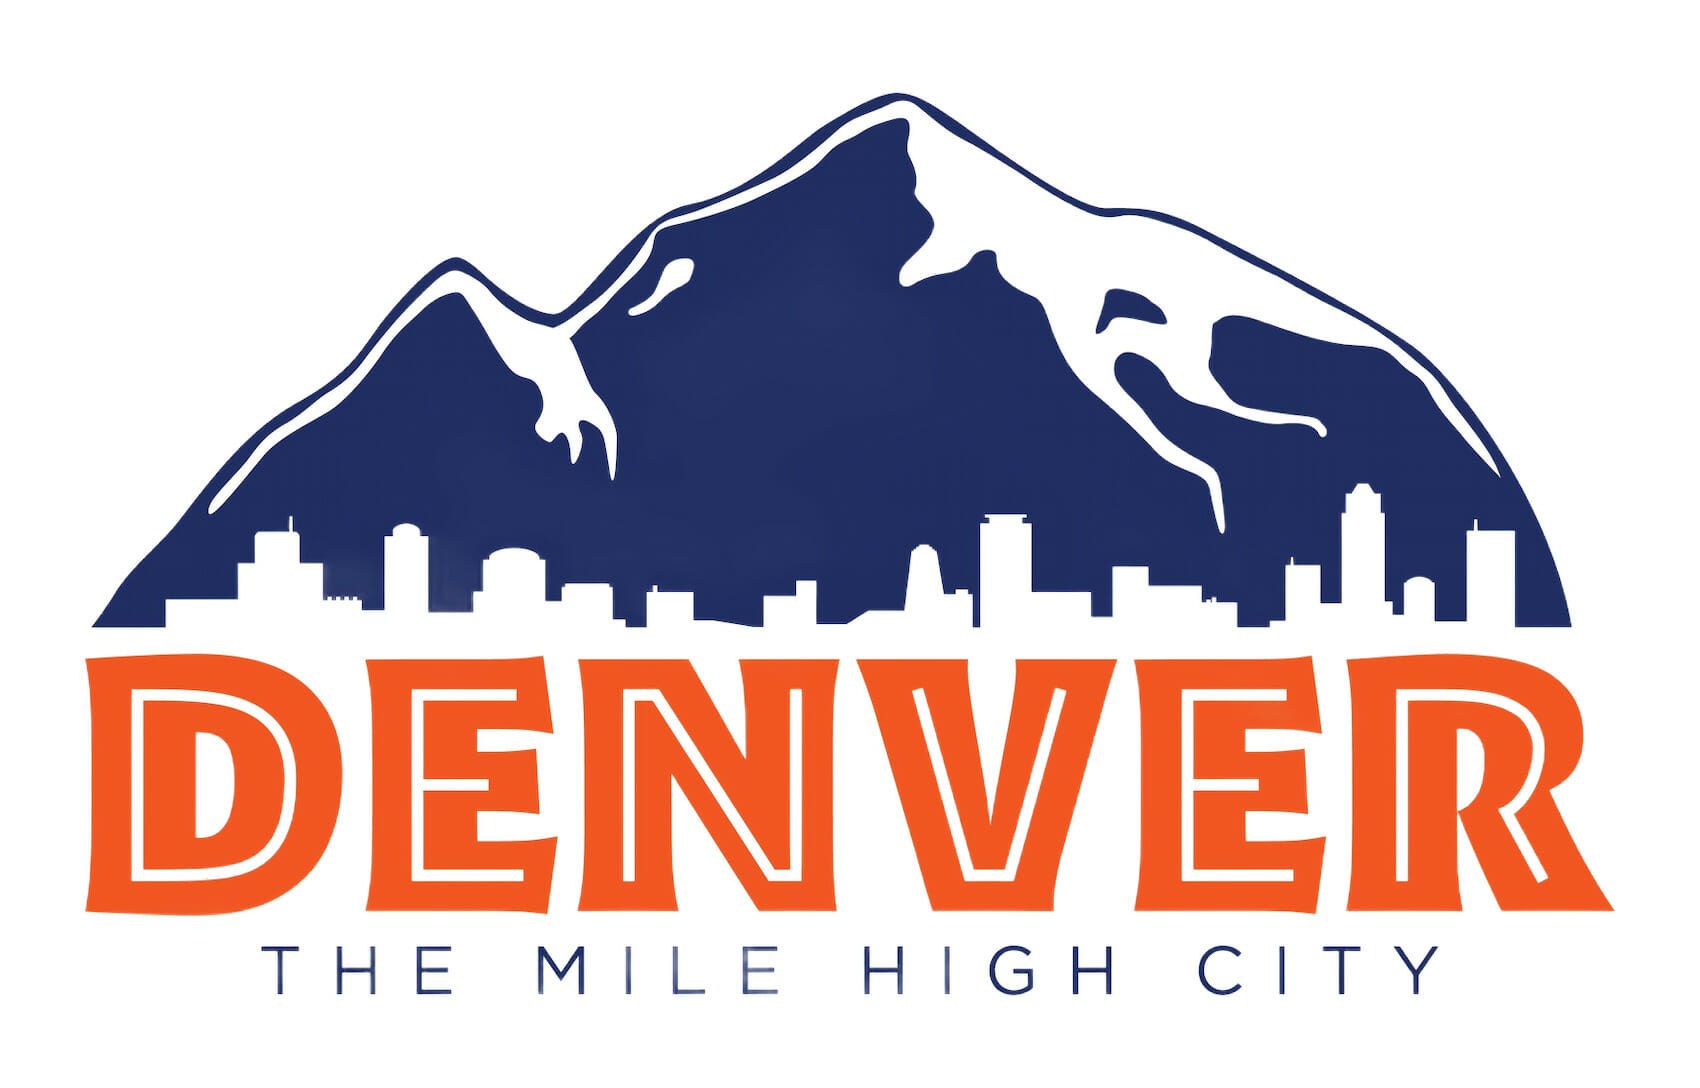 Denver, Colorado: The Mile High City, home to Mile High Psychology